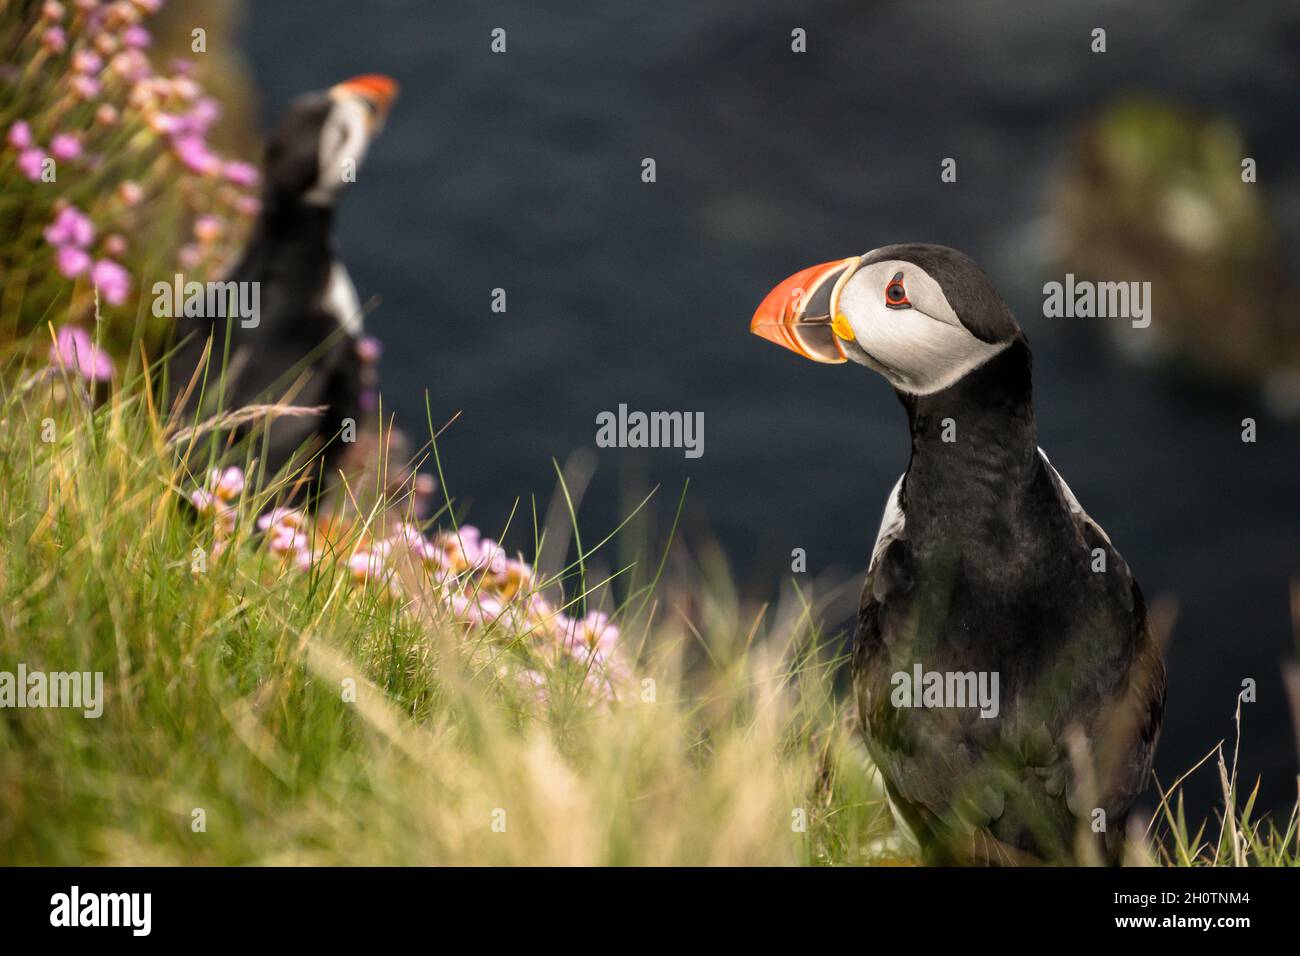 Puffin looking alert on a grassy cliff top above the sea with another puffin in the background Stock Photo